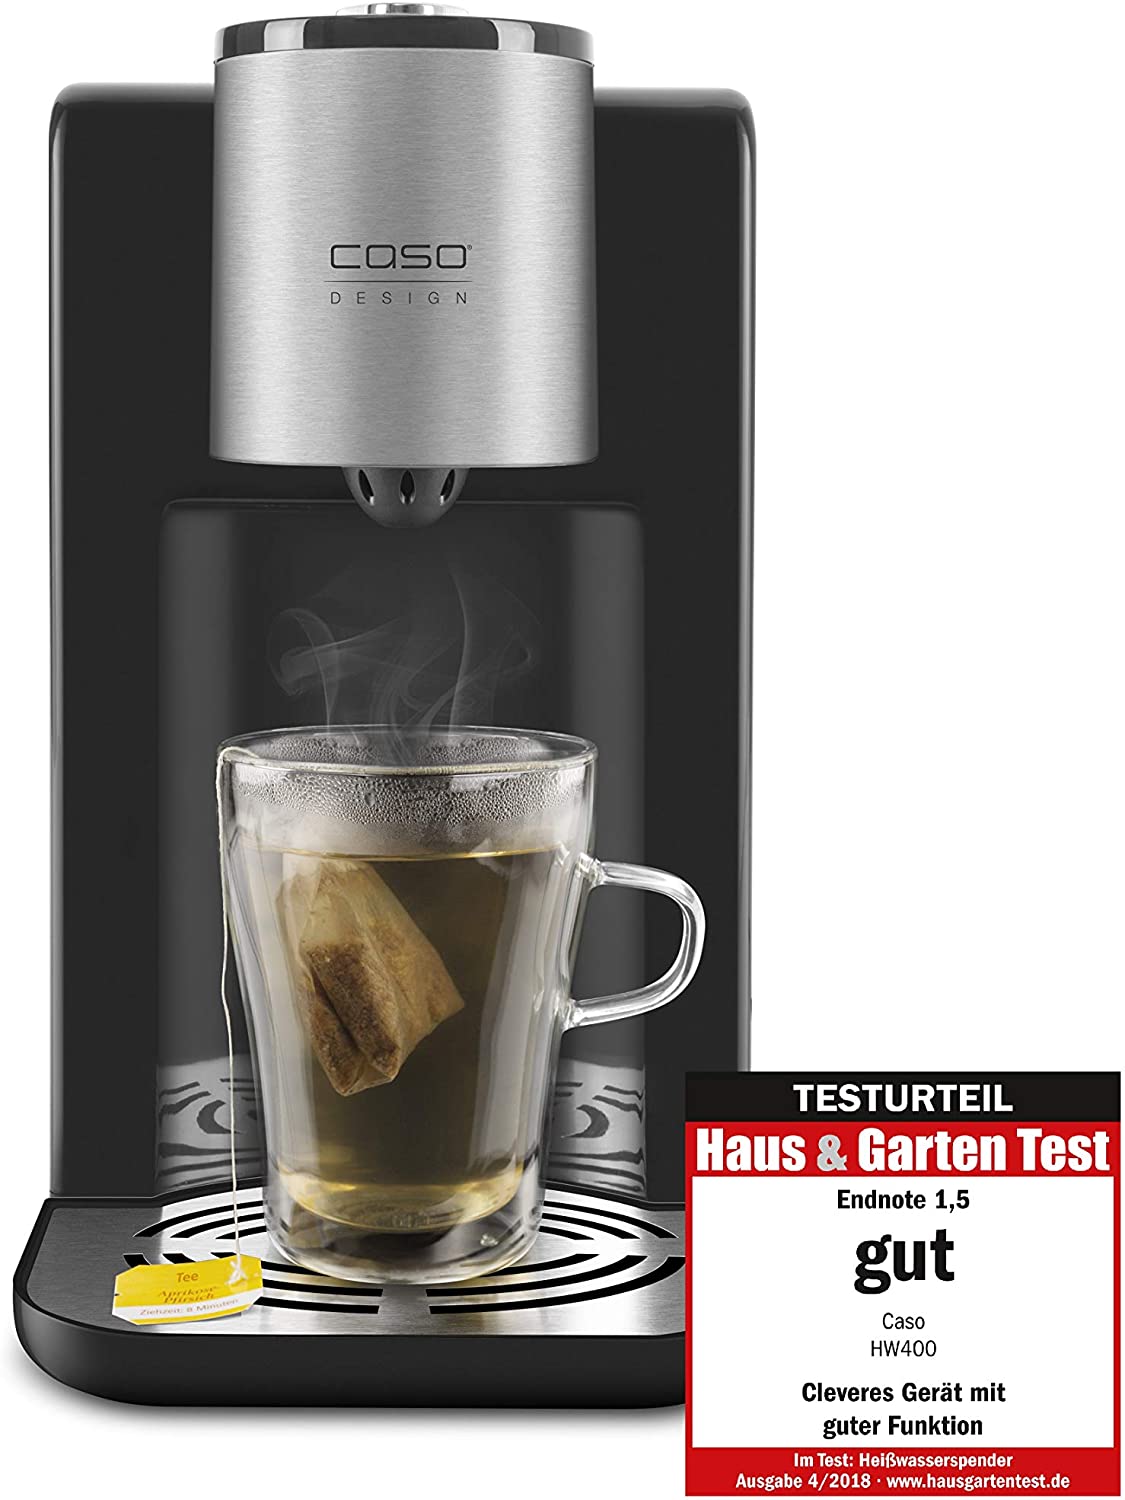 Caso HW 400 - Turbo Hot Water Dispenser - Hot Water in a Few Seconds, 2600 Watt, 45°C - 100°C Adjustable, Water Tank 2.2 Litres, 50% Energy Saving Compared to a Kettle 1862